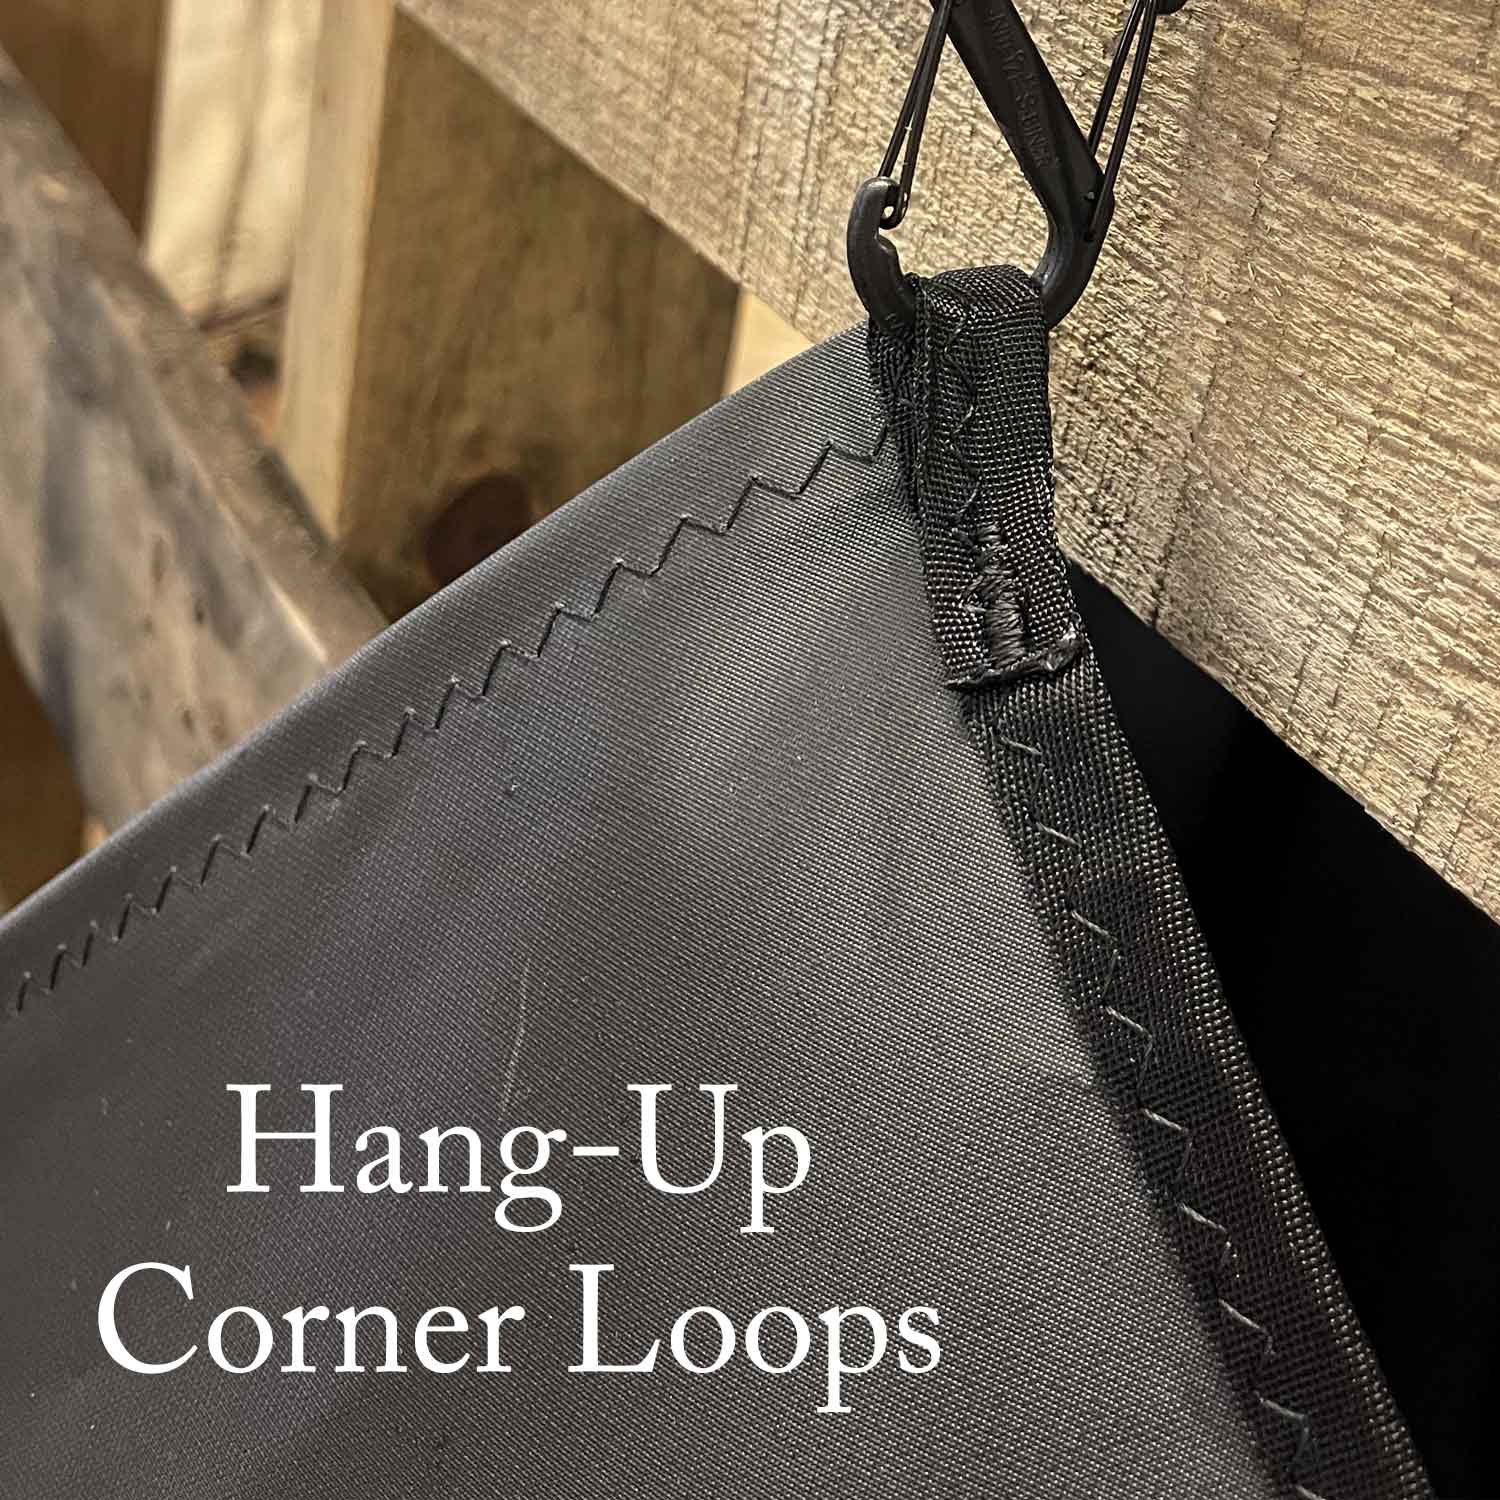 Two Internal loops - one in each corner of the bag - for you to hang-up the bag when needed.  Keep it off the ground - suspend it while you hose it off - or hang to dry. 